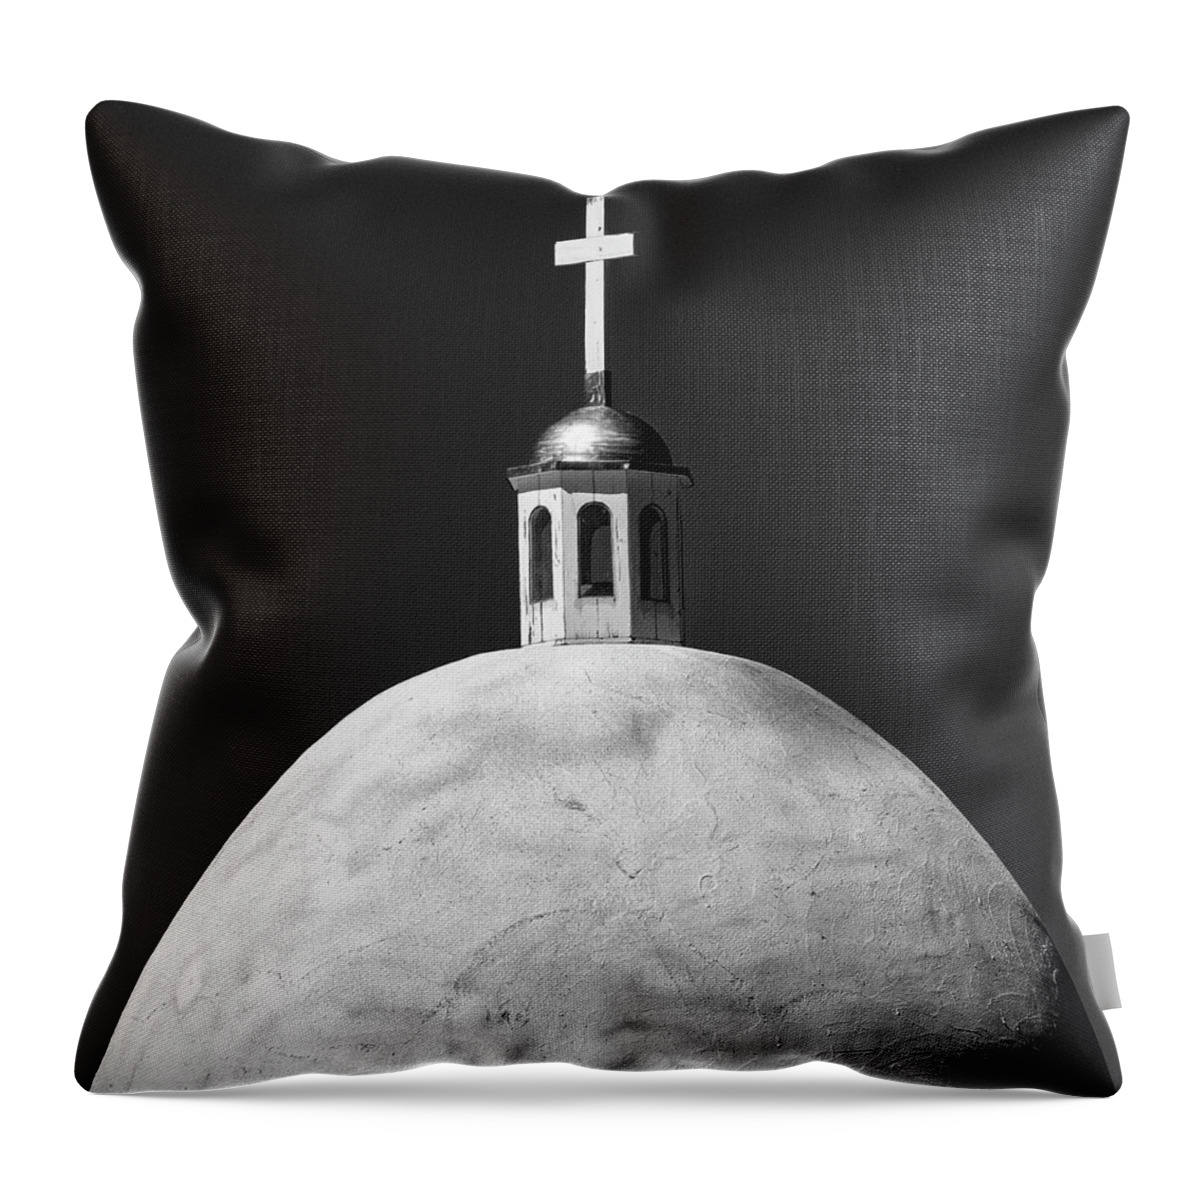 San Luis Valley Throw Pillow featuring the photograph Stations Of The Cross Dome by C. Fredrickson Photography